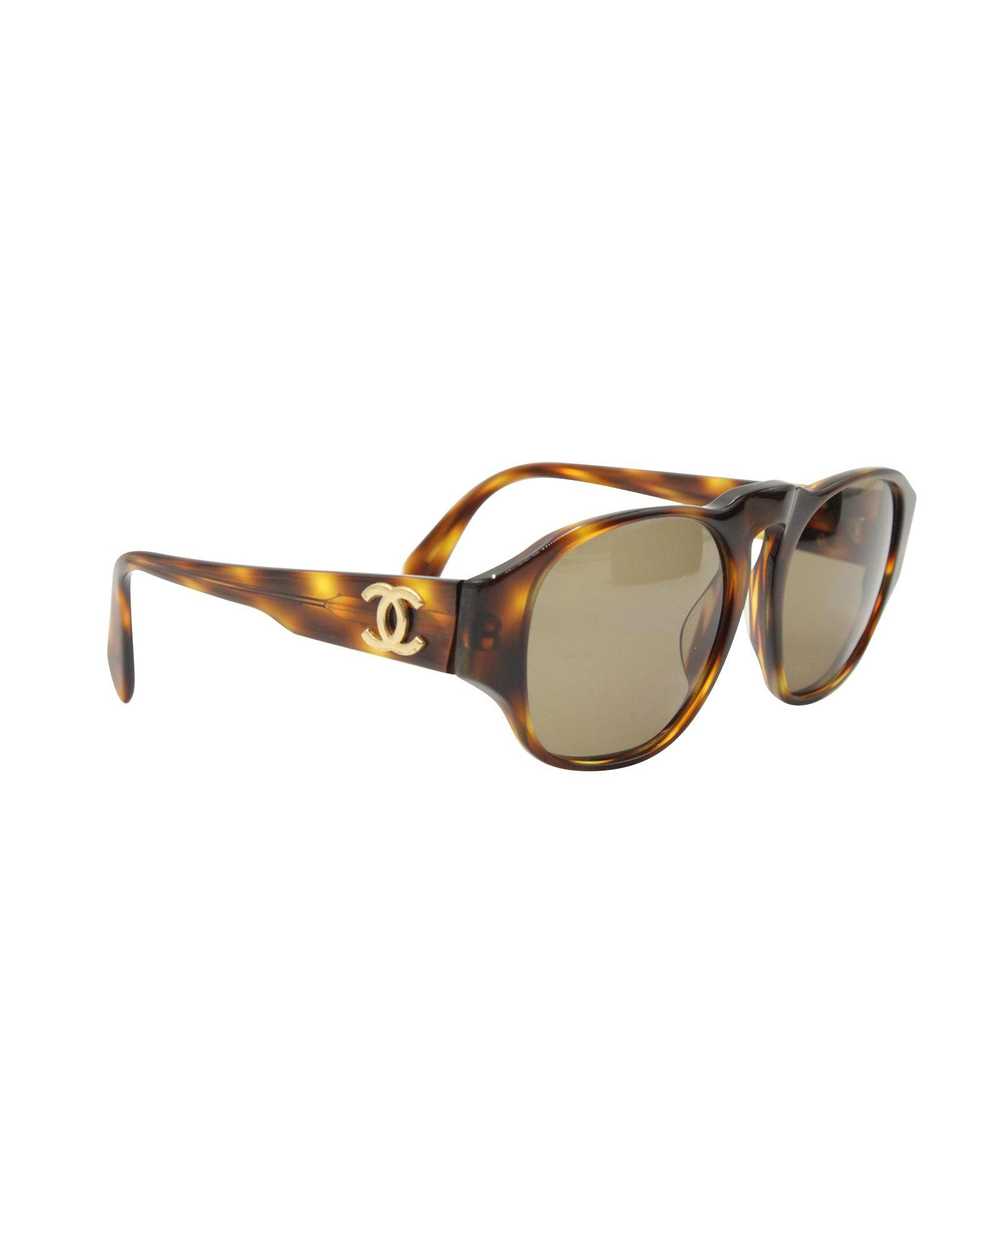 Product Details Chanel Tortoise Shell Sunglasses - image 3